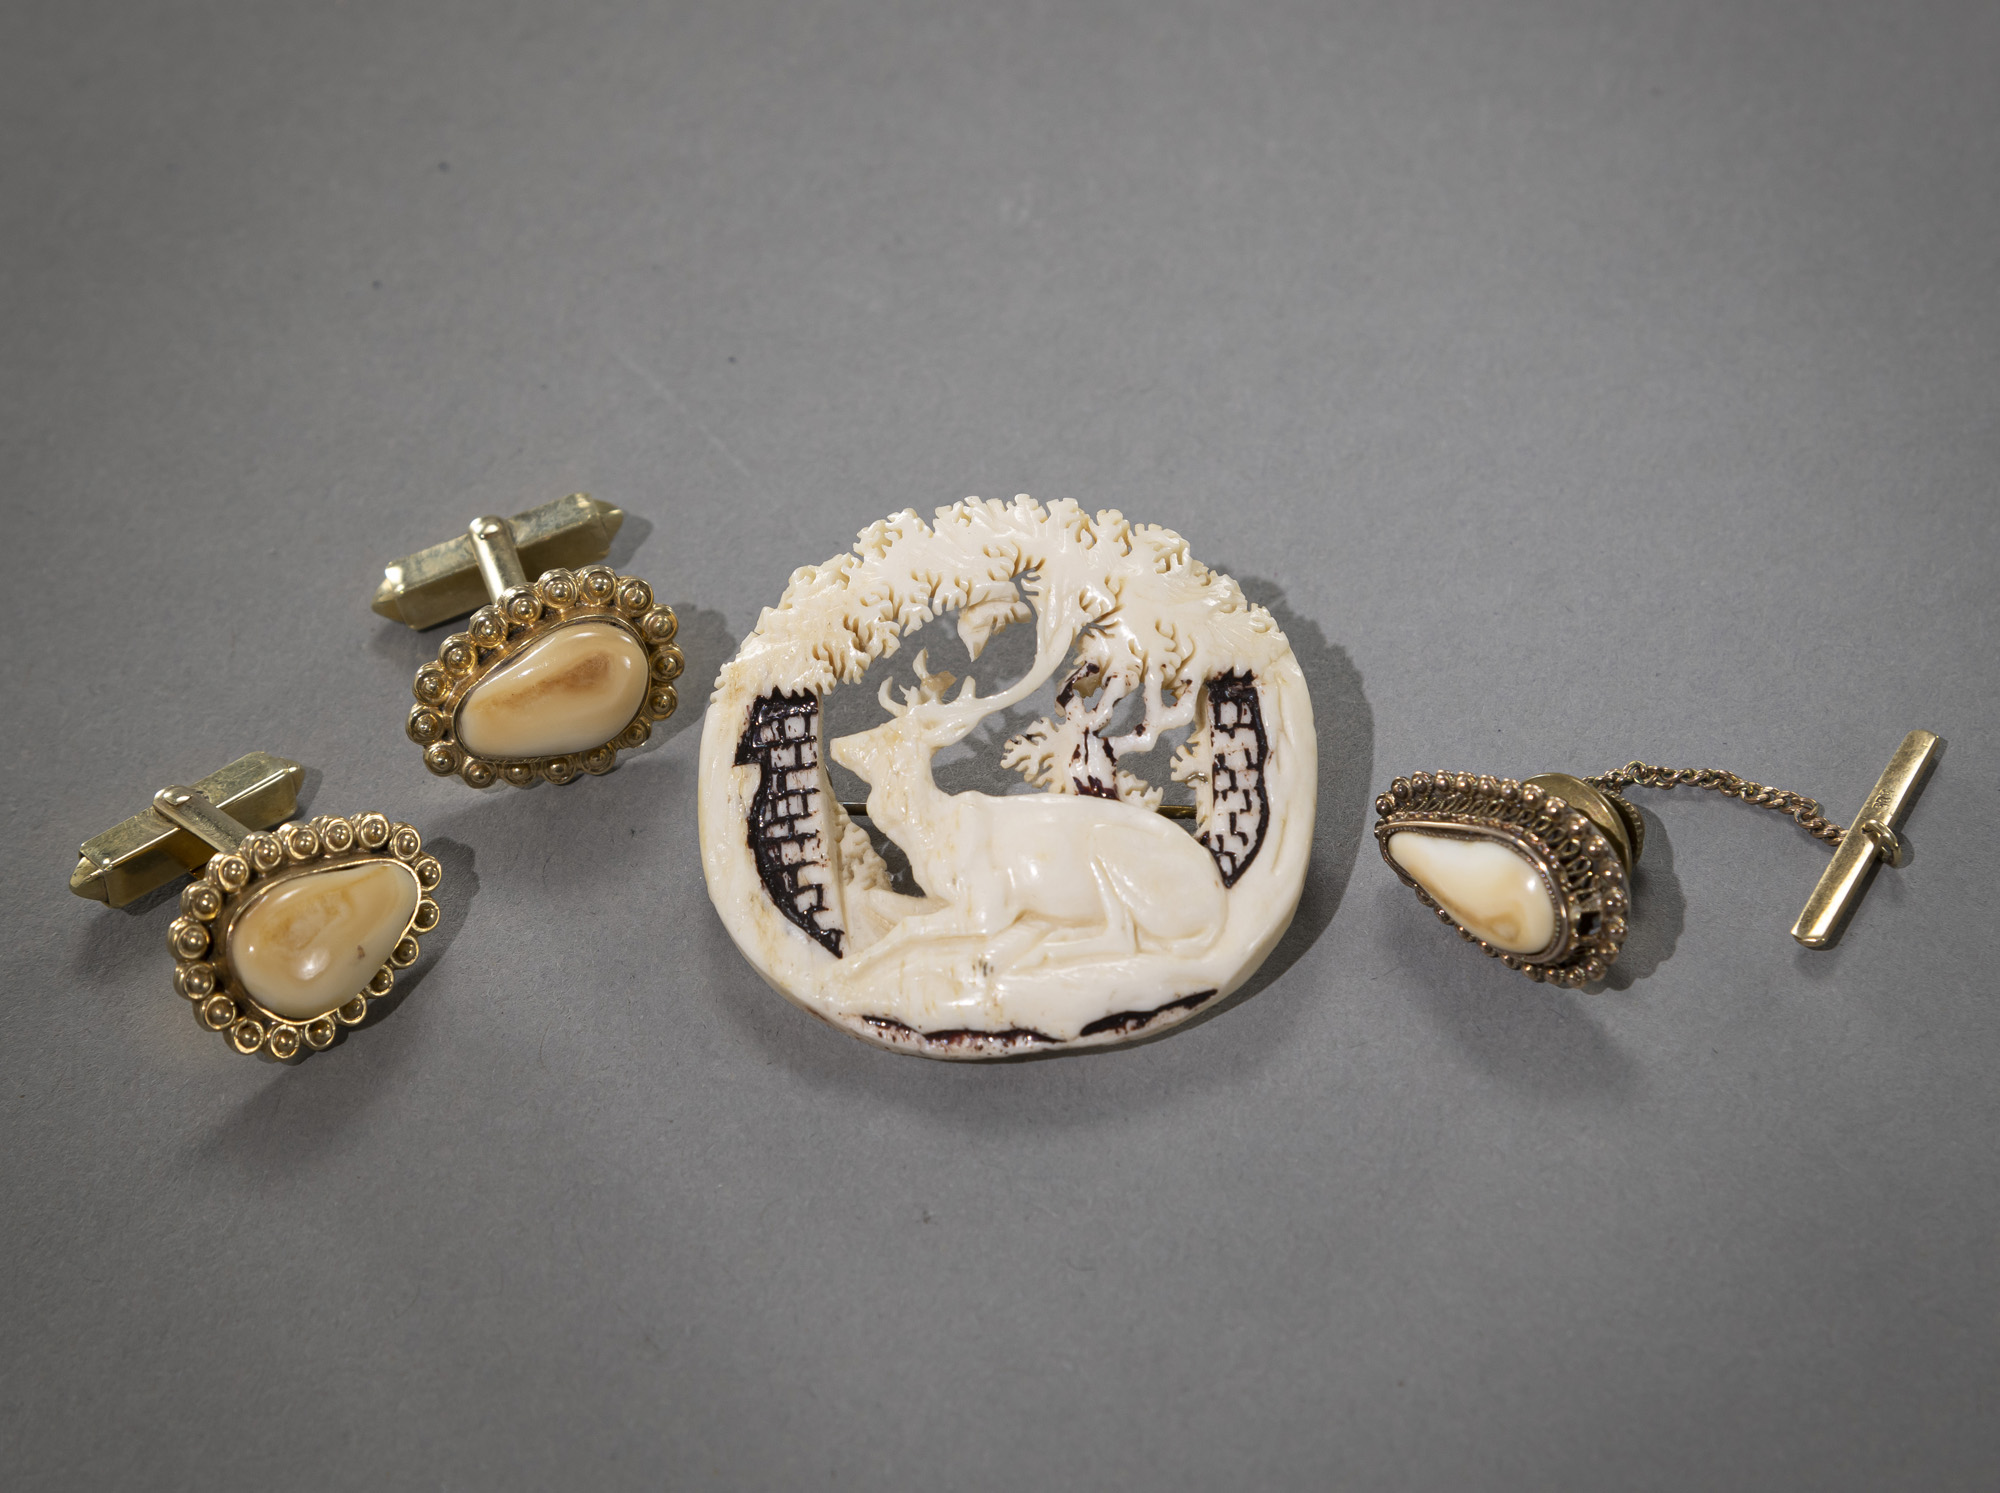 A CARVED BONE HUNTING BROOCH, A PAIR OF CUFF LINKS AND A STICK PIN - Image 2 of 3